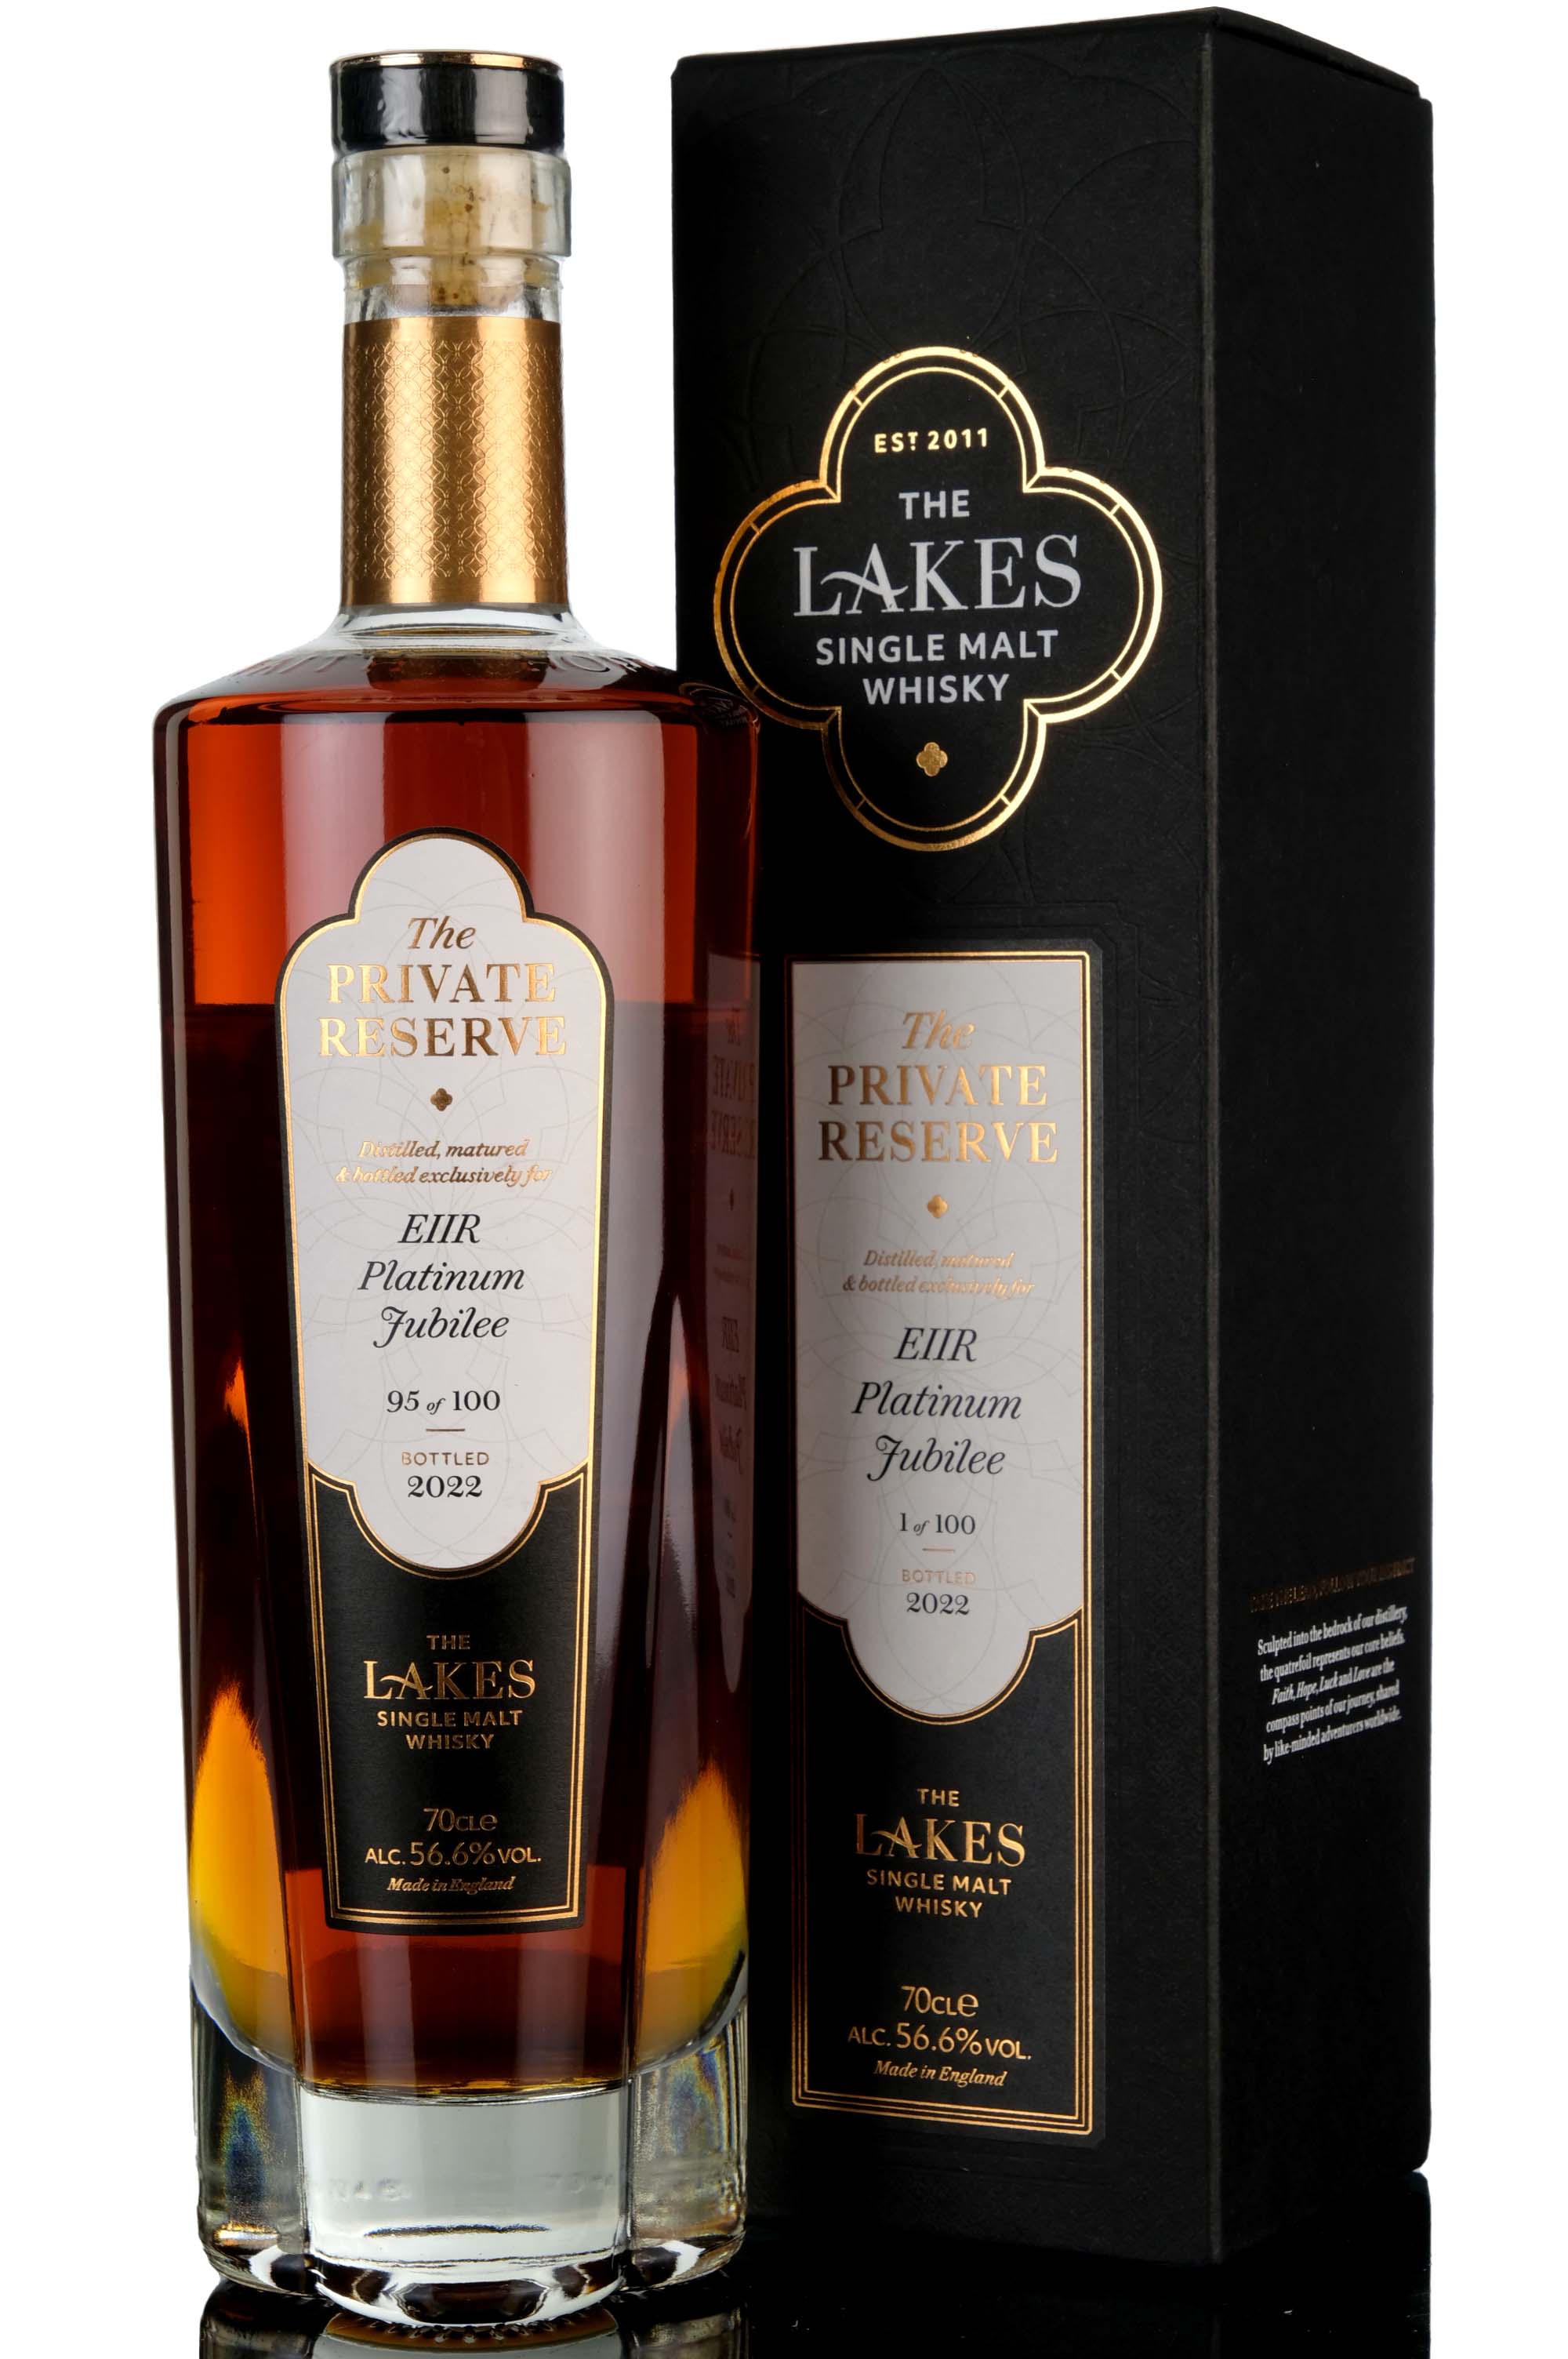 The Lakes Private Reserve - Exclusively For EIIR Platinum Jubilee - 2022 Release